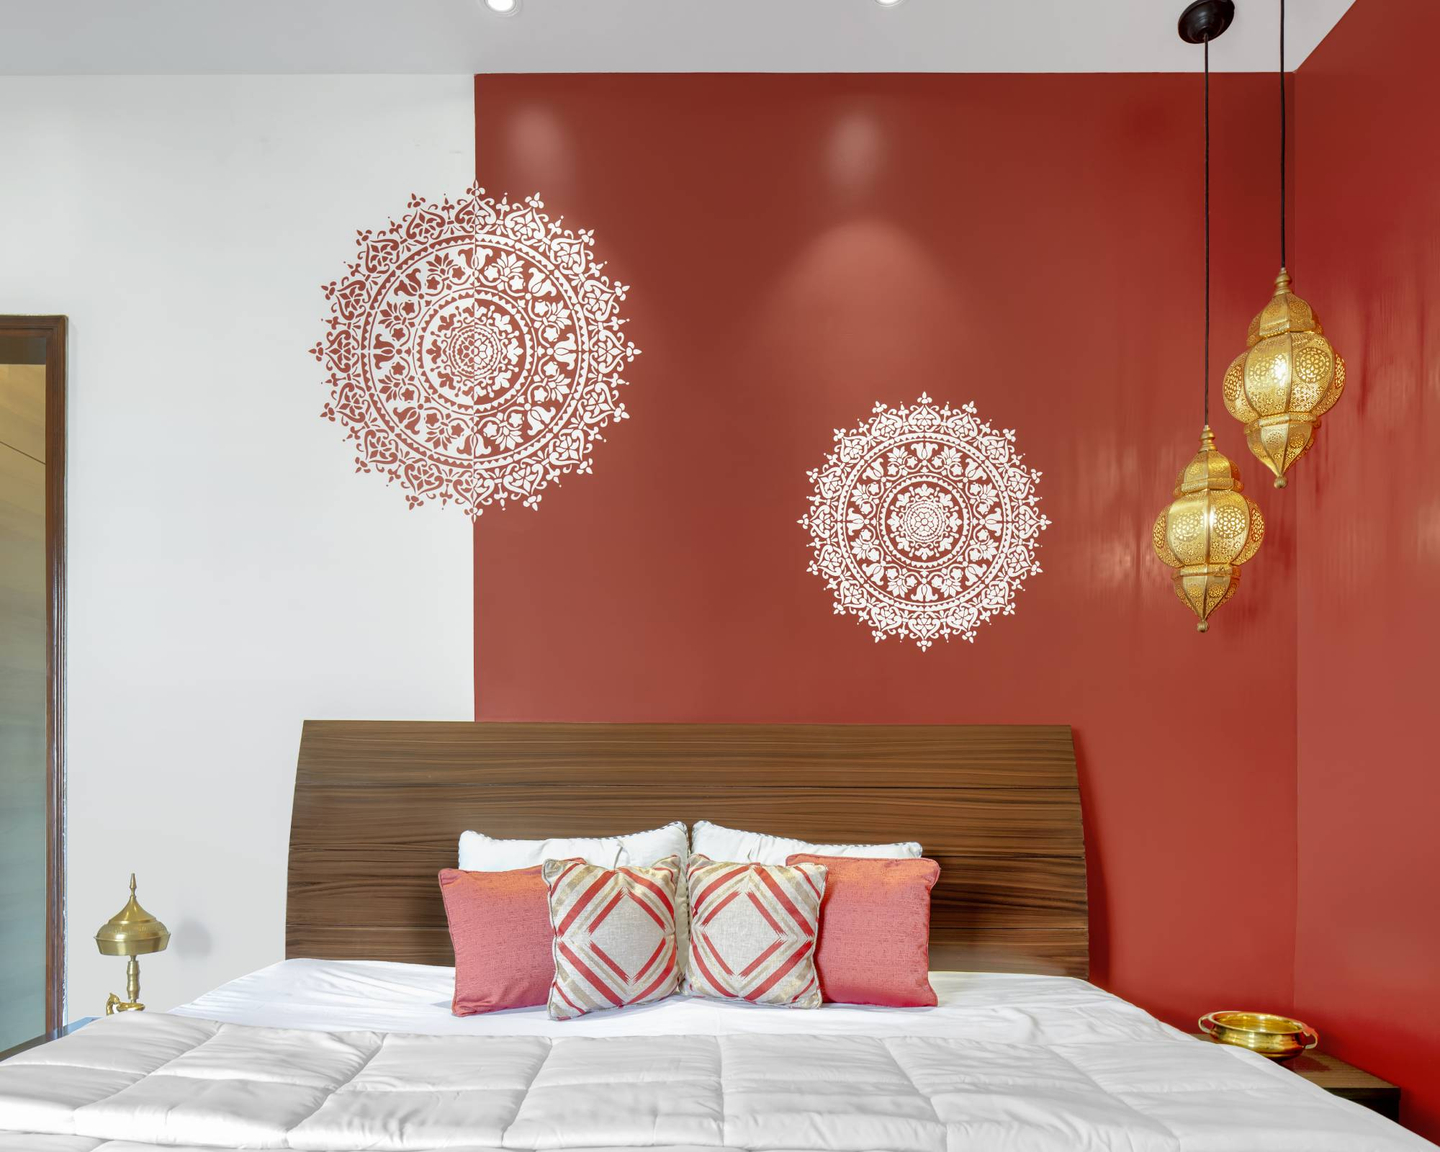 Red And White Guest Room Design - Livspace